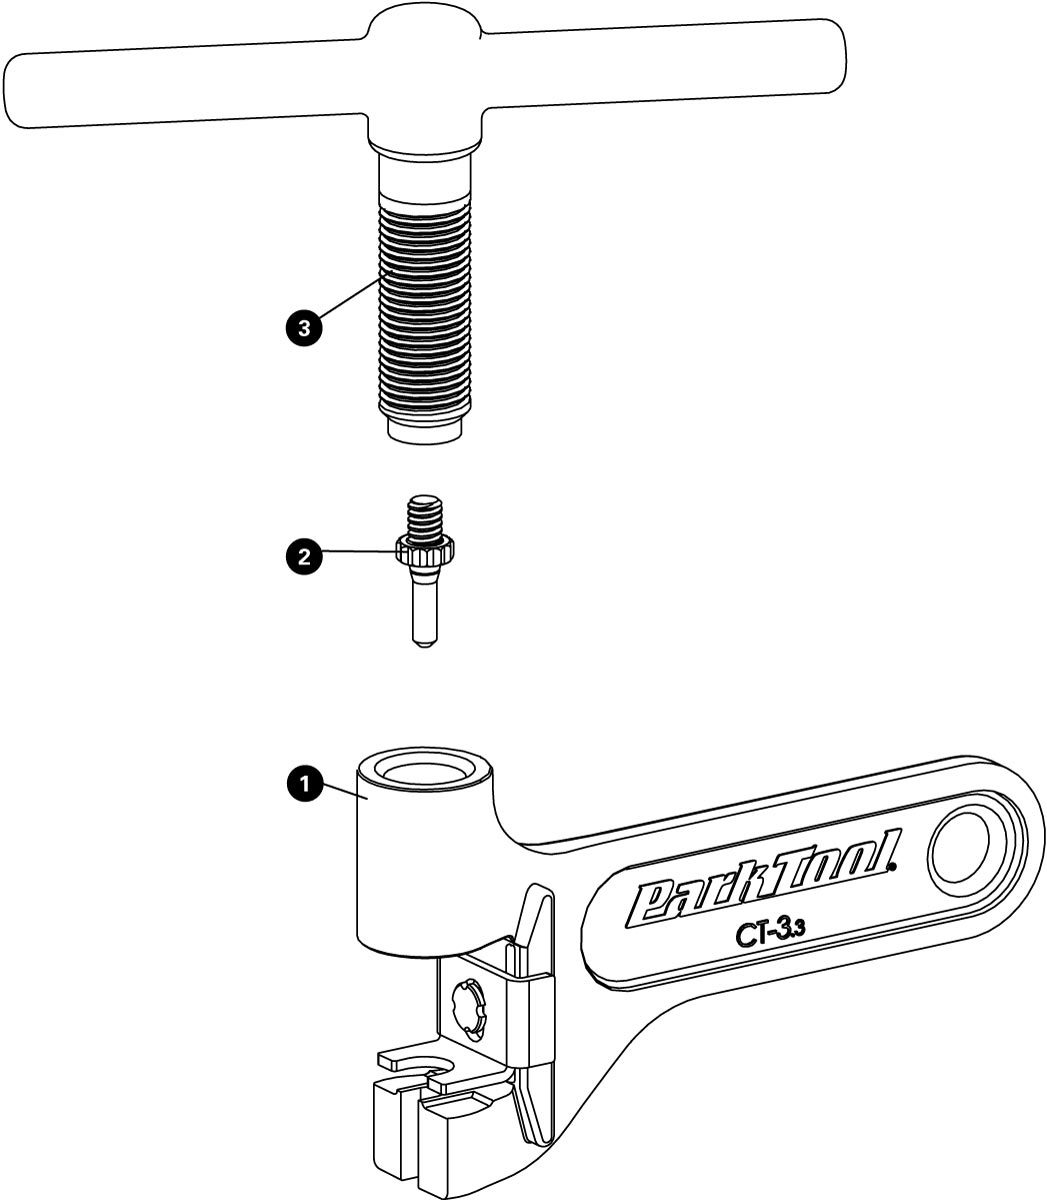 Parts diagram for CT-3.3 Chain Tool, click to enlarge